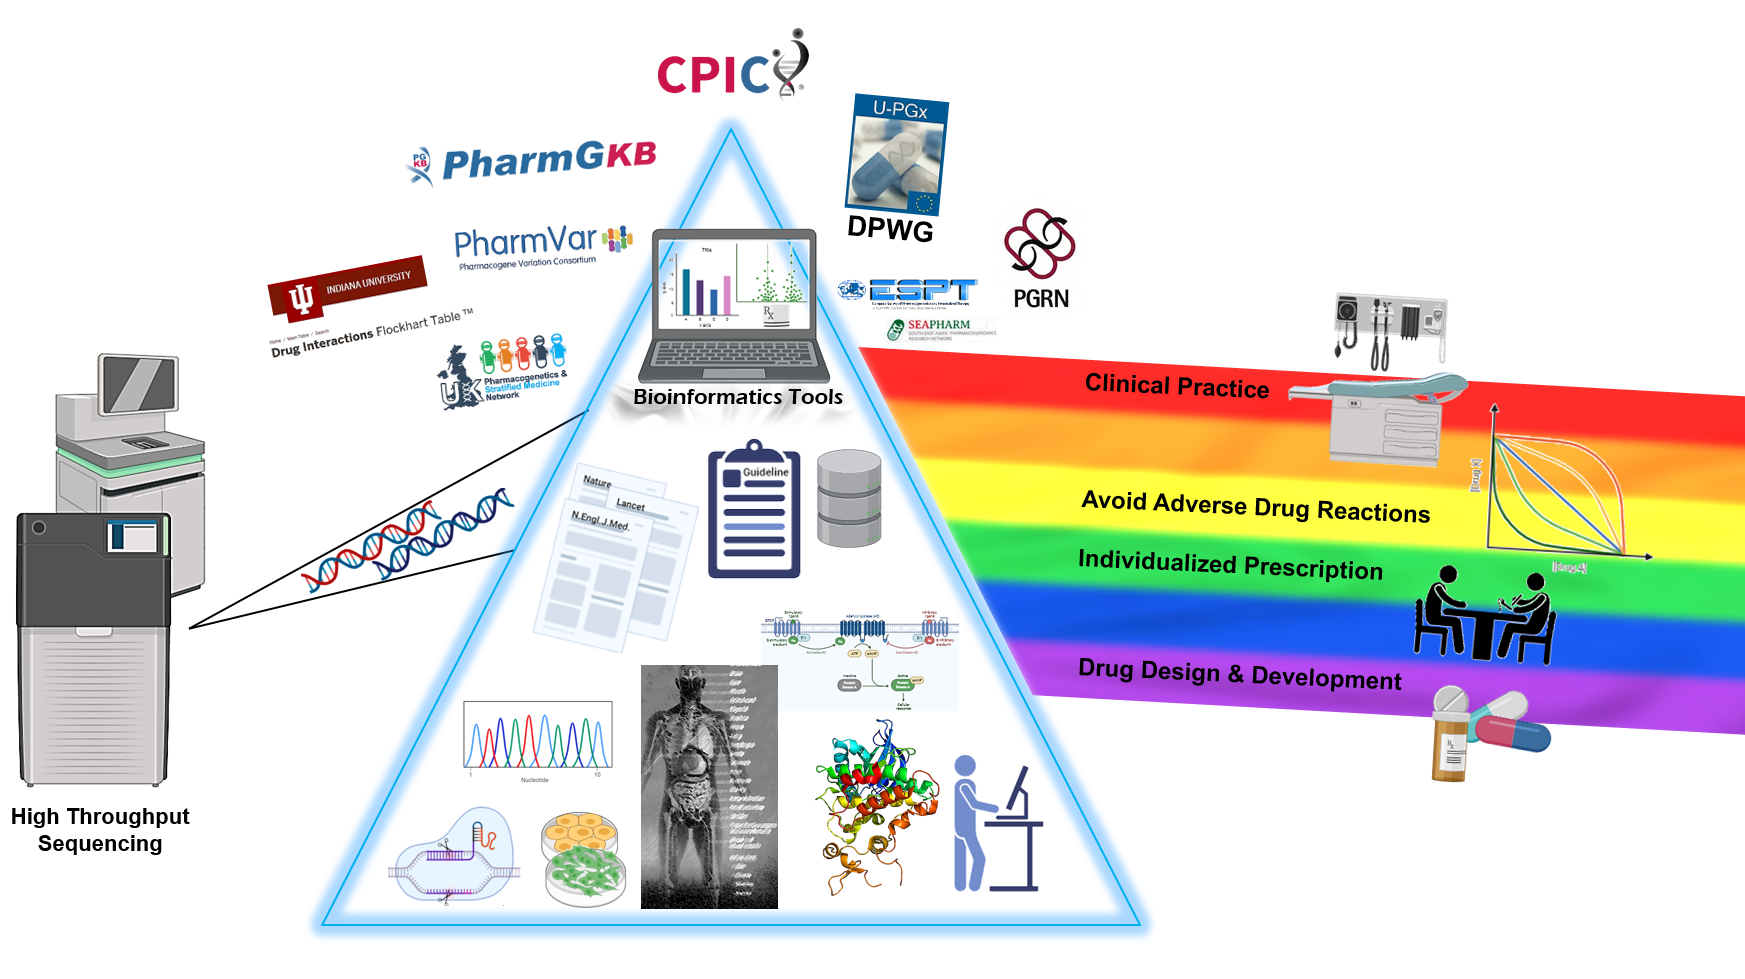 Pharmacogenomics, How to Deal with Different Types of Variants in Next Generation Sequencing Data in the Personalized Medicine Area